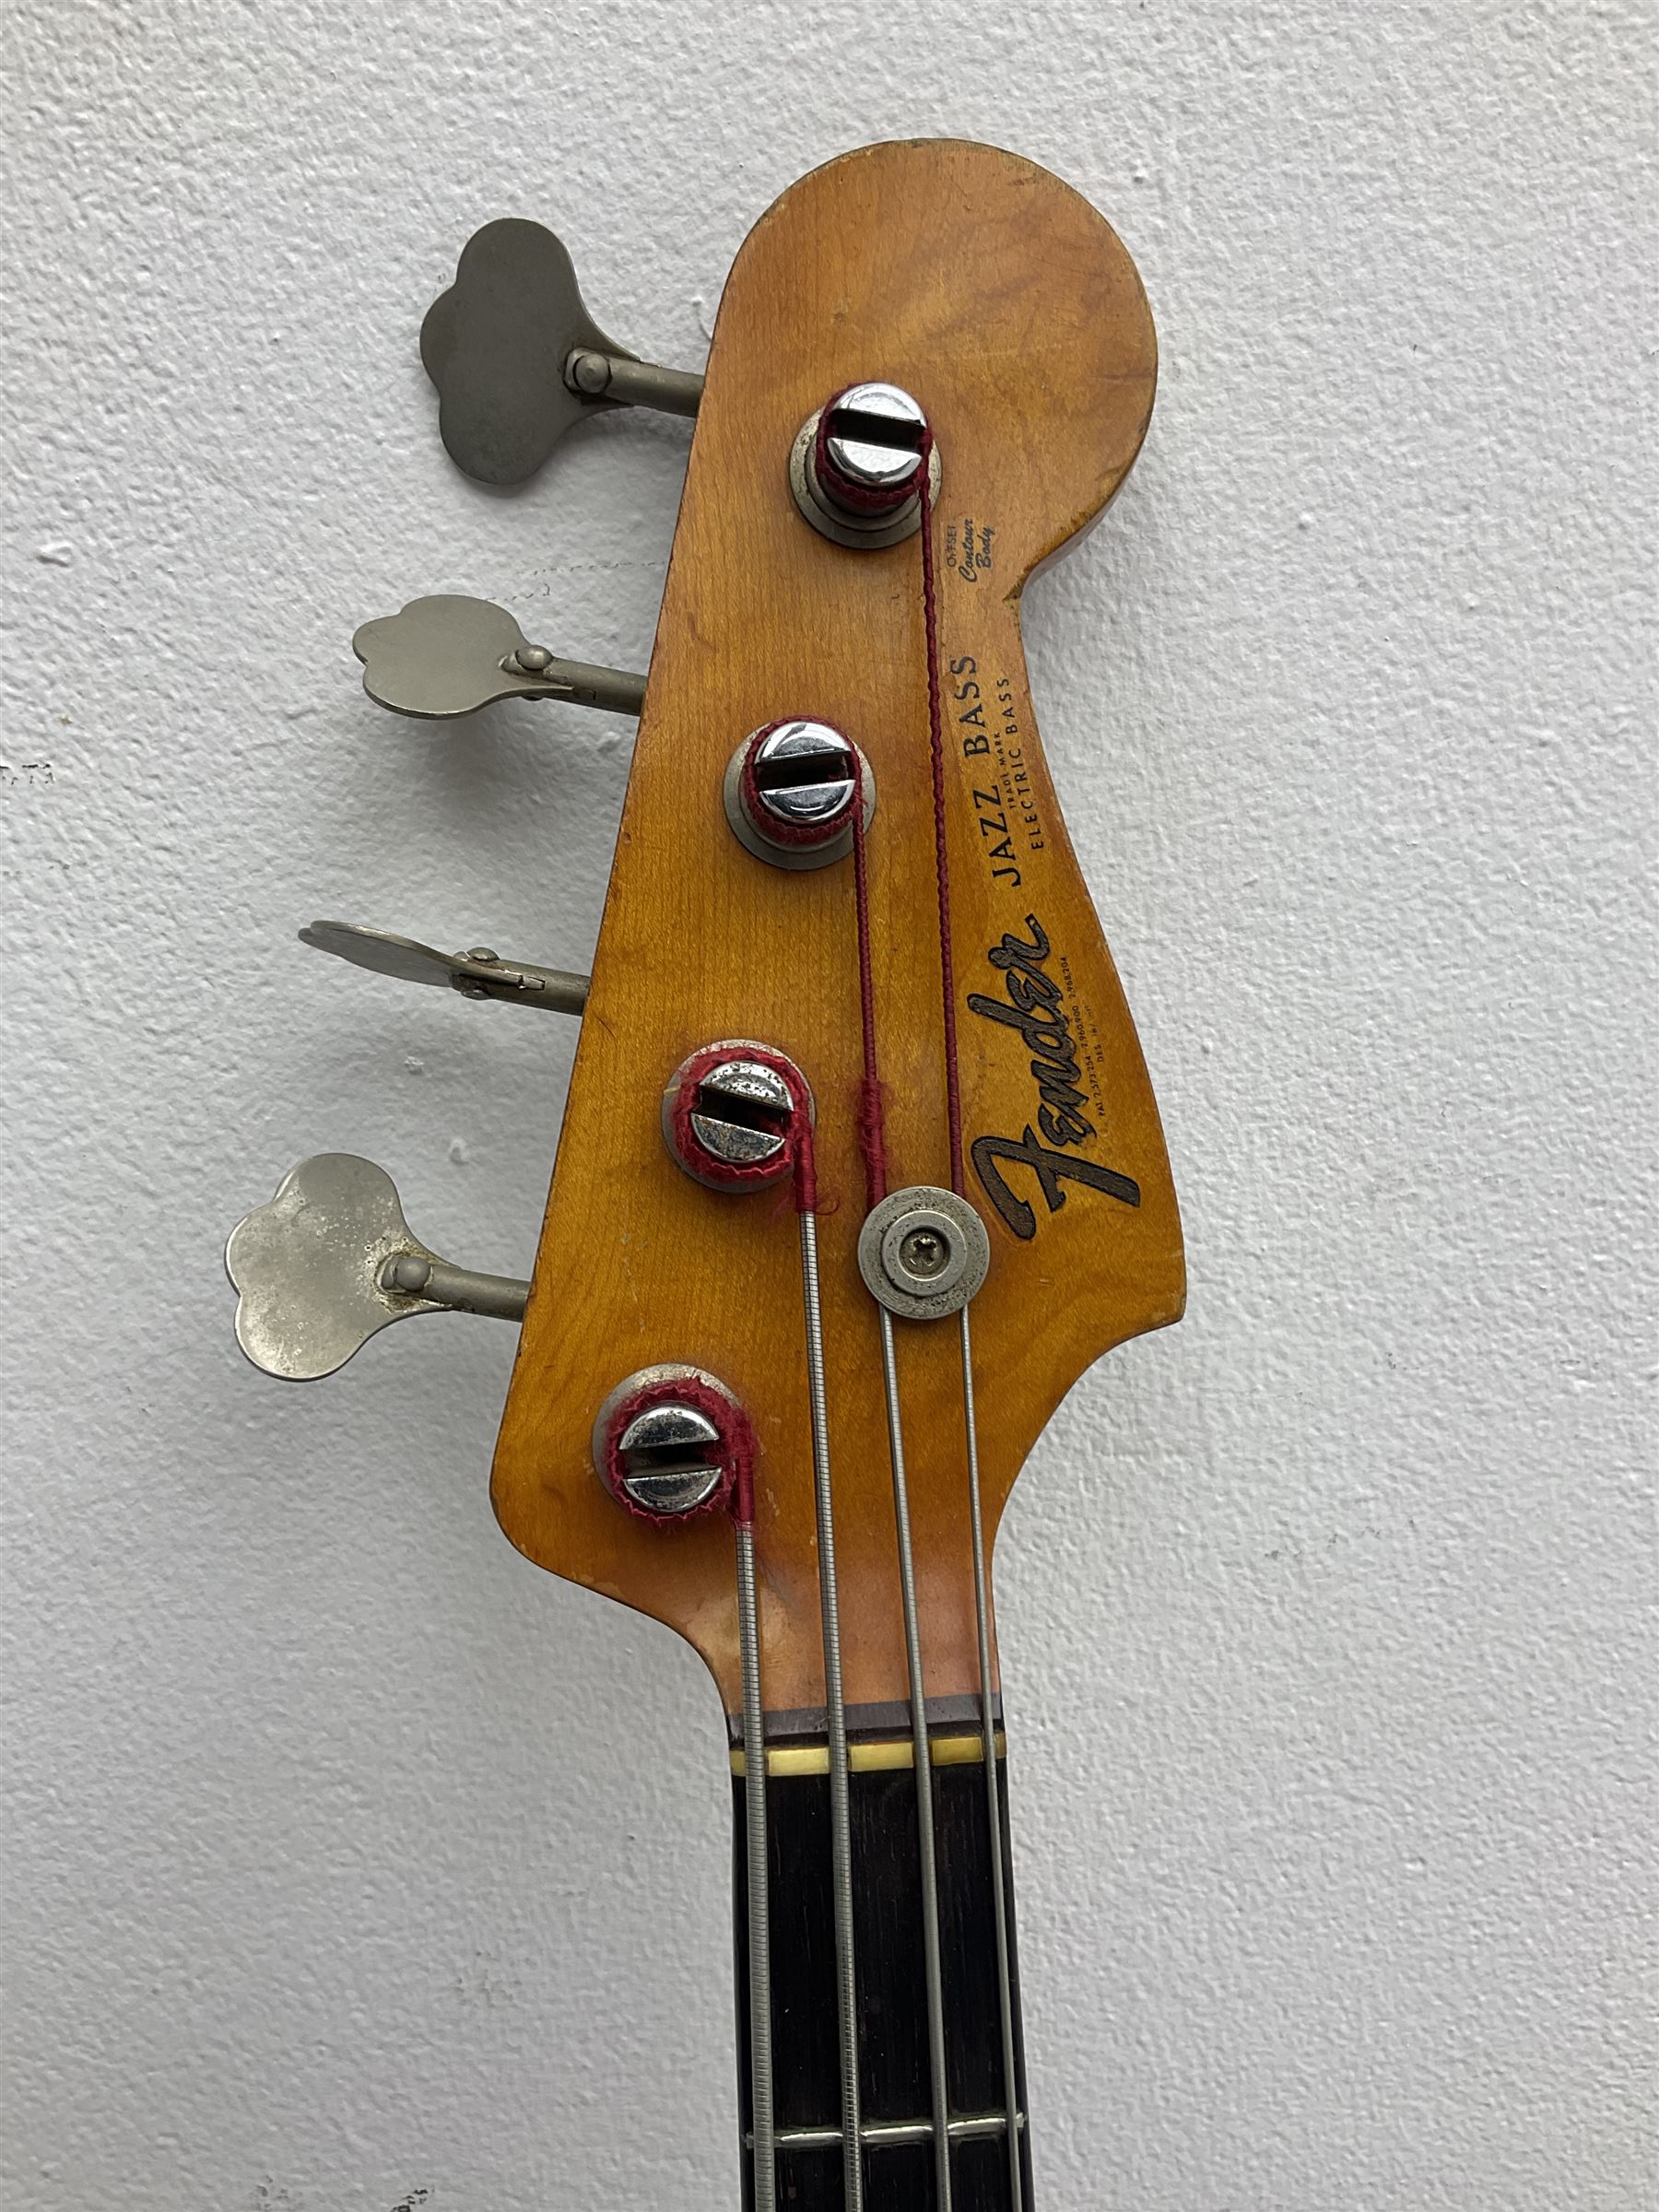 1963 Fender Jazz three-knob bass guitar; impressed with date code 7AUG63A on end of neck and serial - Image 9 of 22